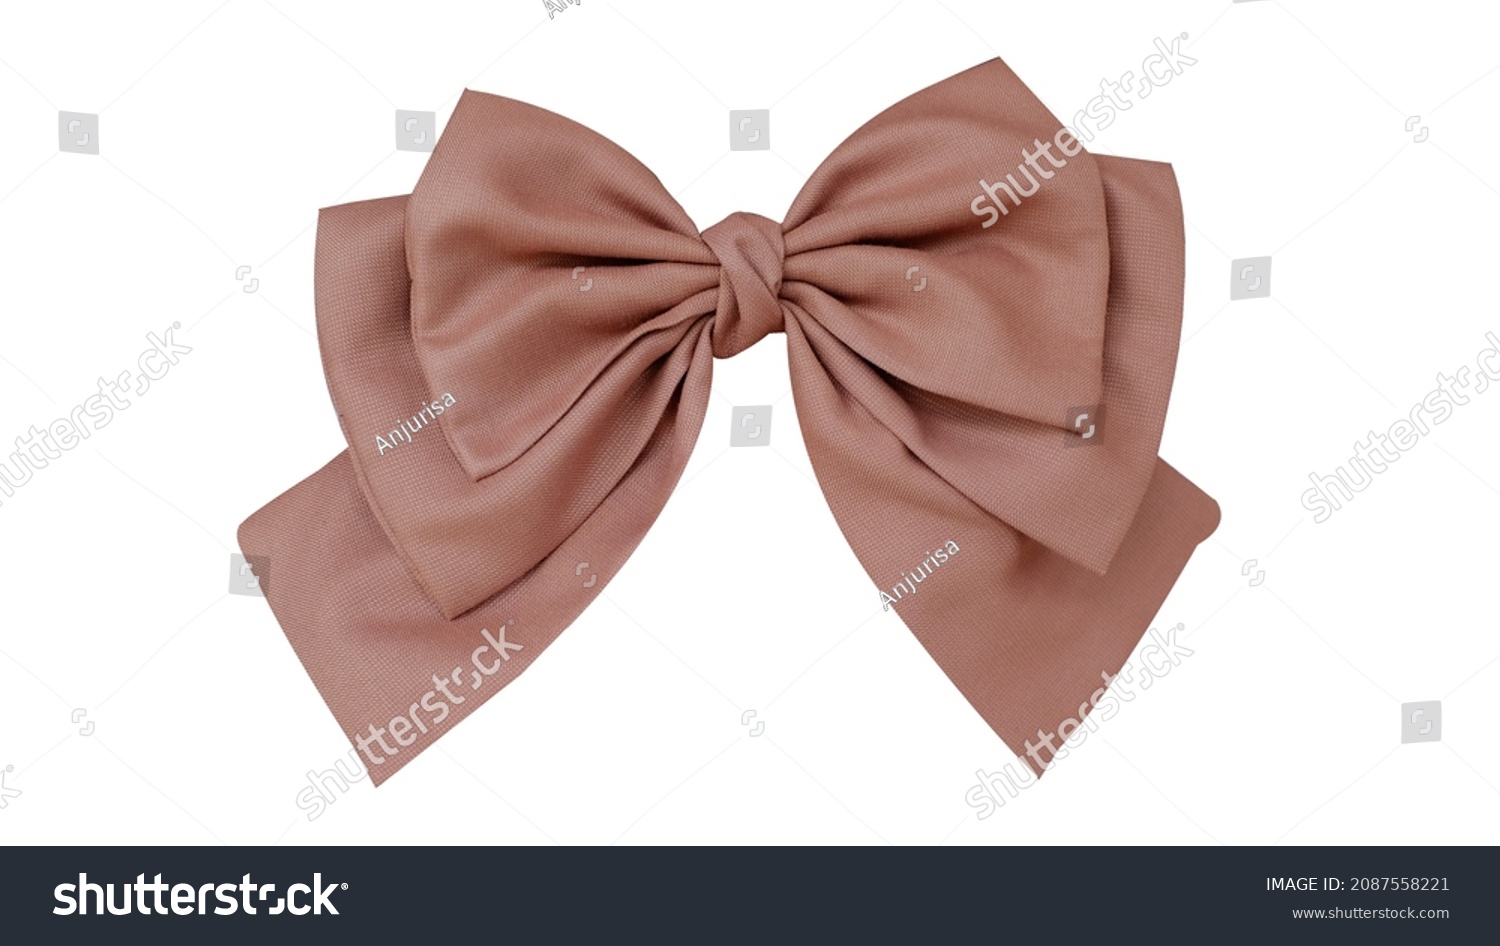 Bow hair with tails in beautiful soft brown color and white background, so elegant and fashionable. This hair bow is a hair clip accessory for girls and women. #2087558221